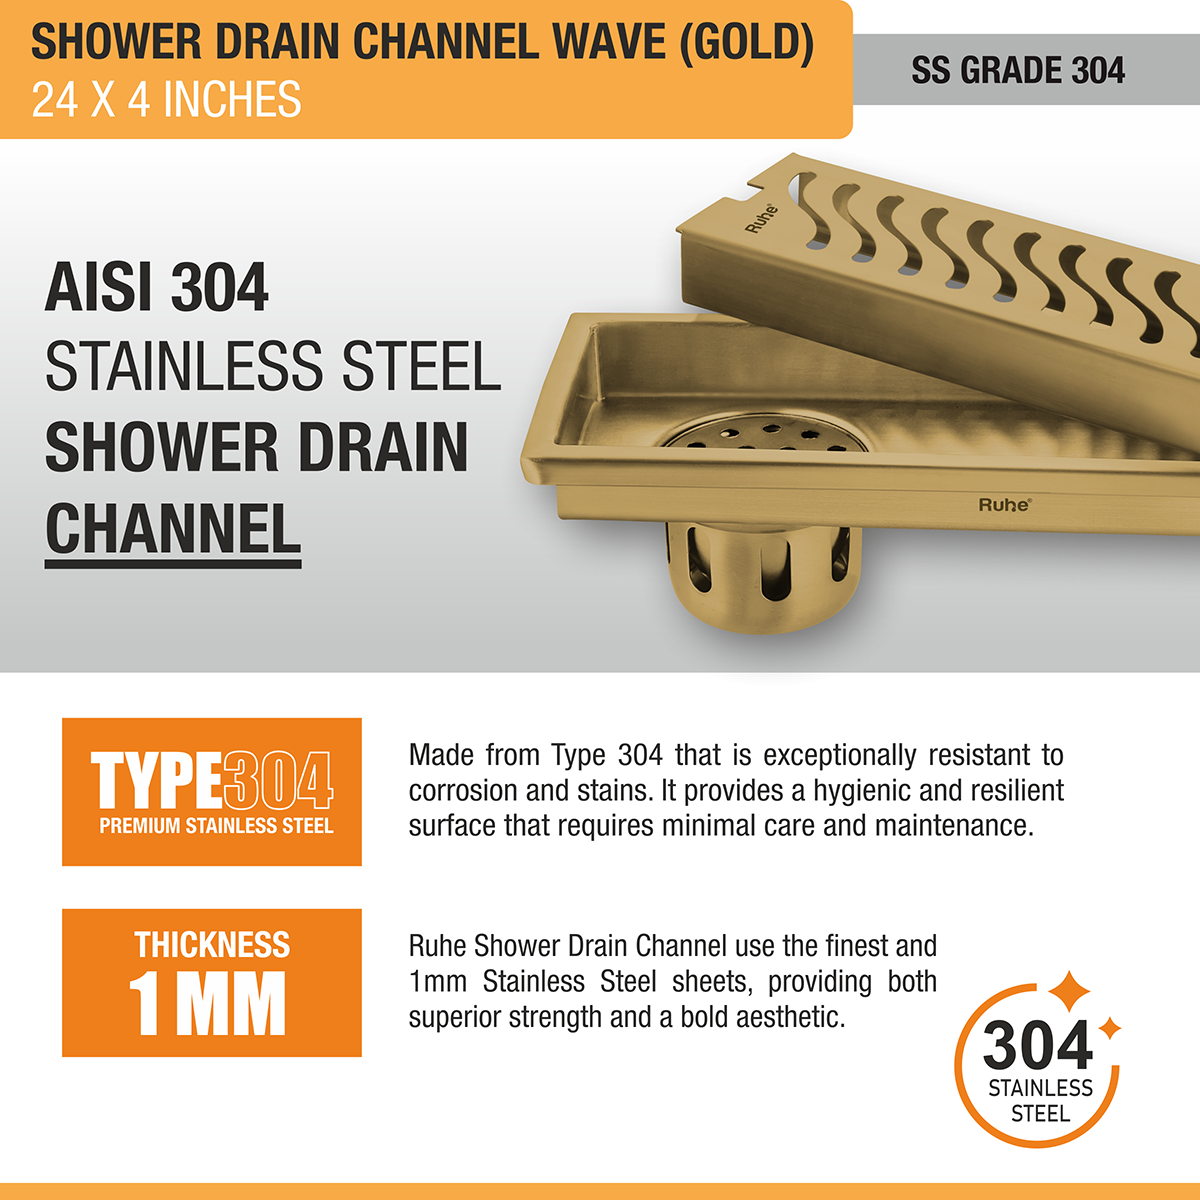 Wave Shower Drain Channel (24 x 4 Inches) YELLOW GOLD stainless steel